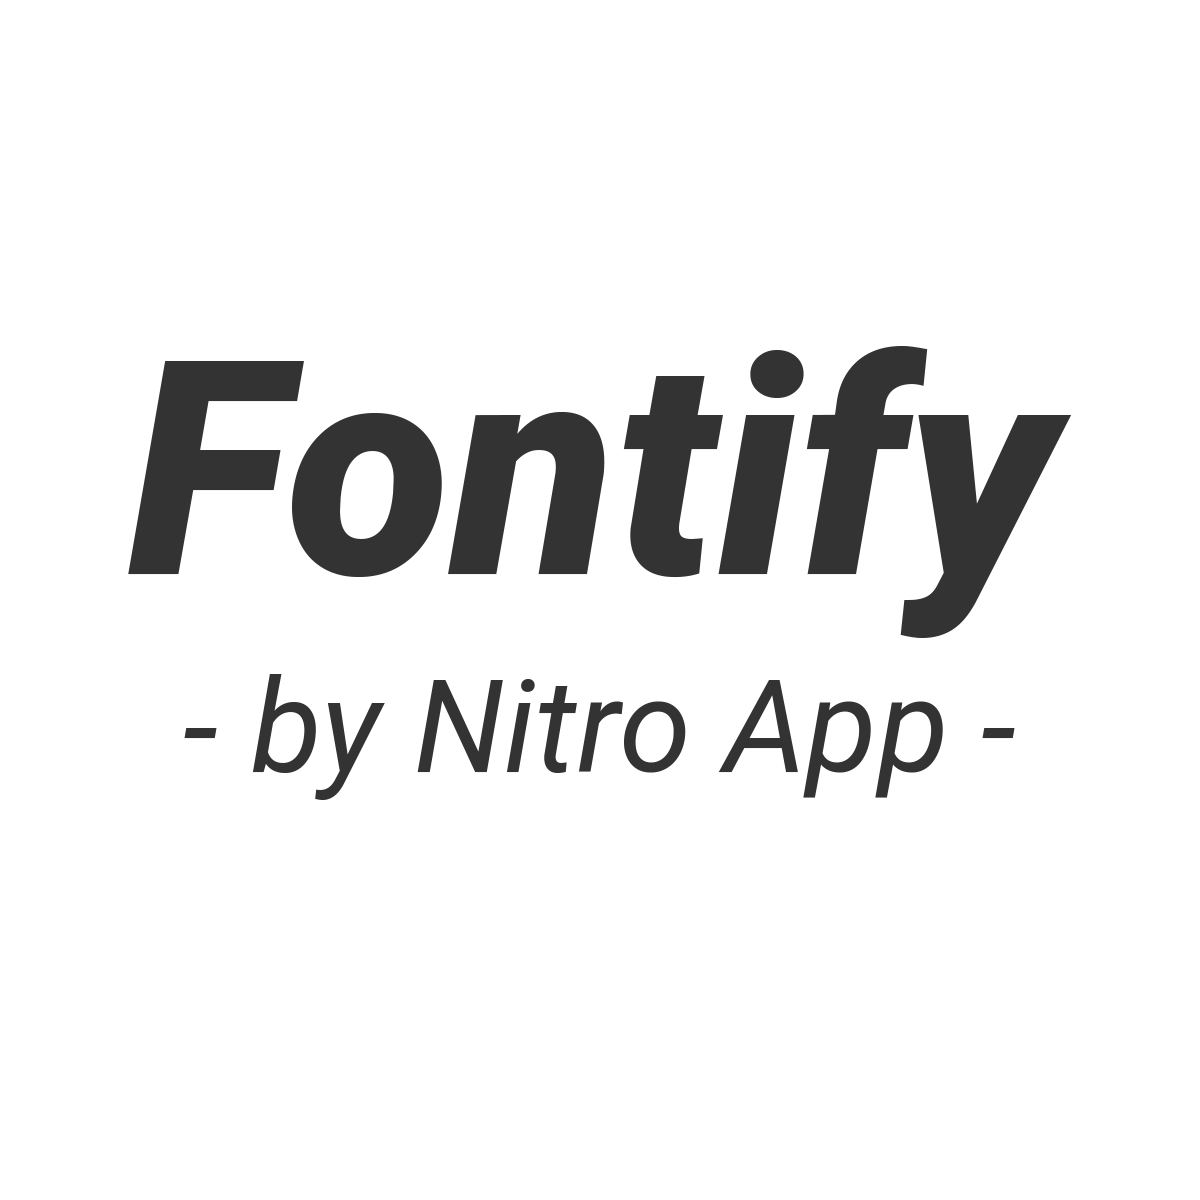 Hire Shopify Experts to integrate Fontify â€‘ Use any font app into a Shopify store